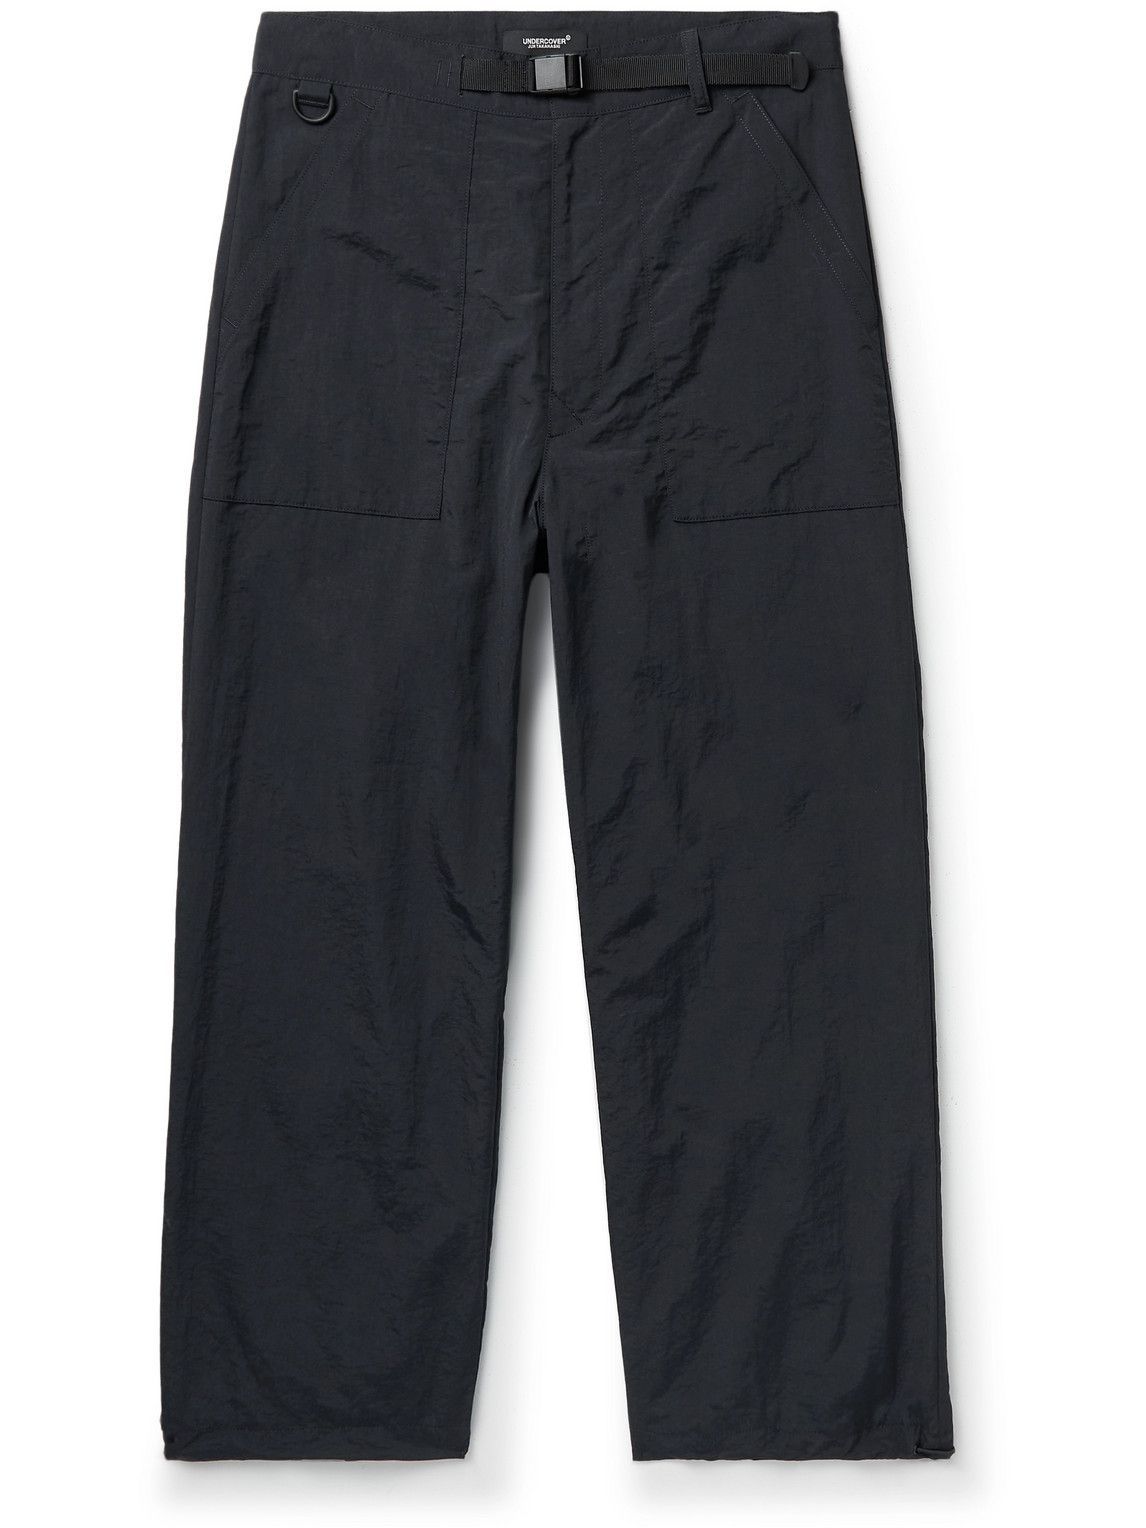 UNDERCOVER - Straight-Leg Belted Nylon Trousers - Black Undercover